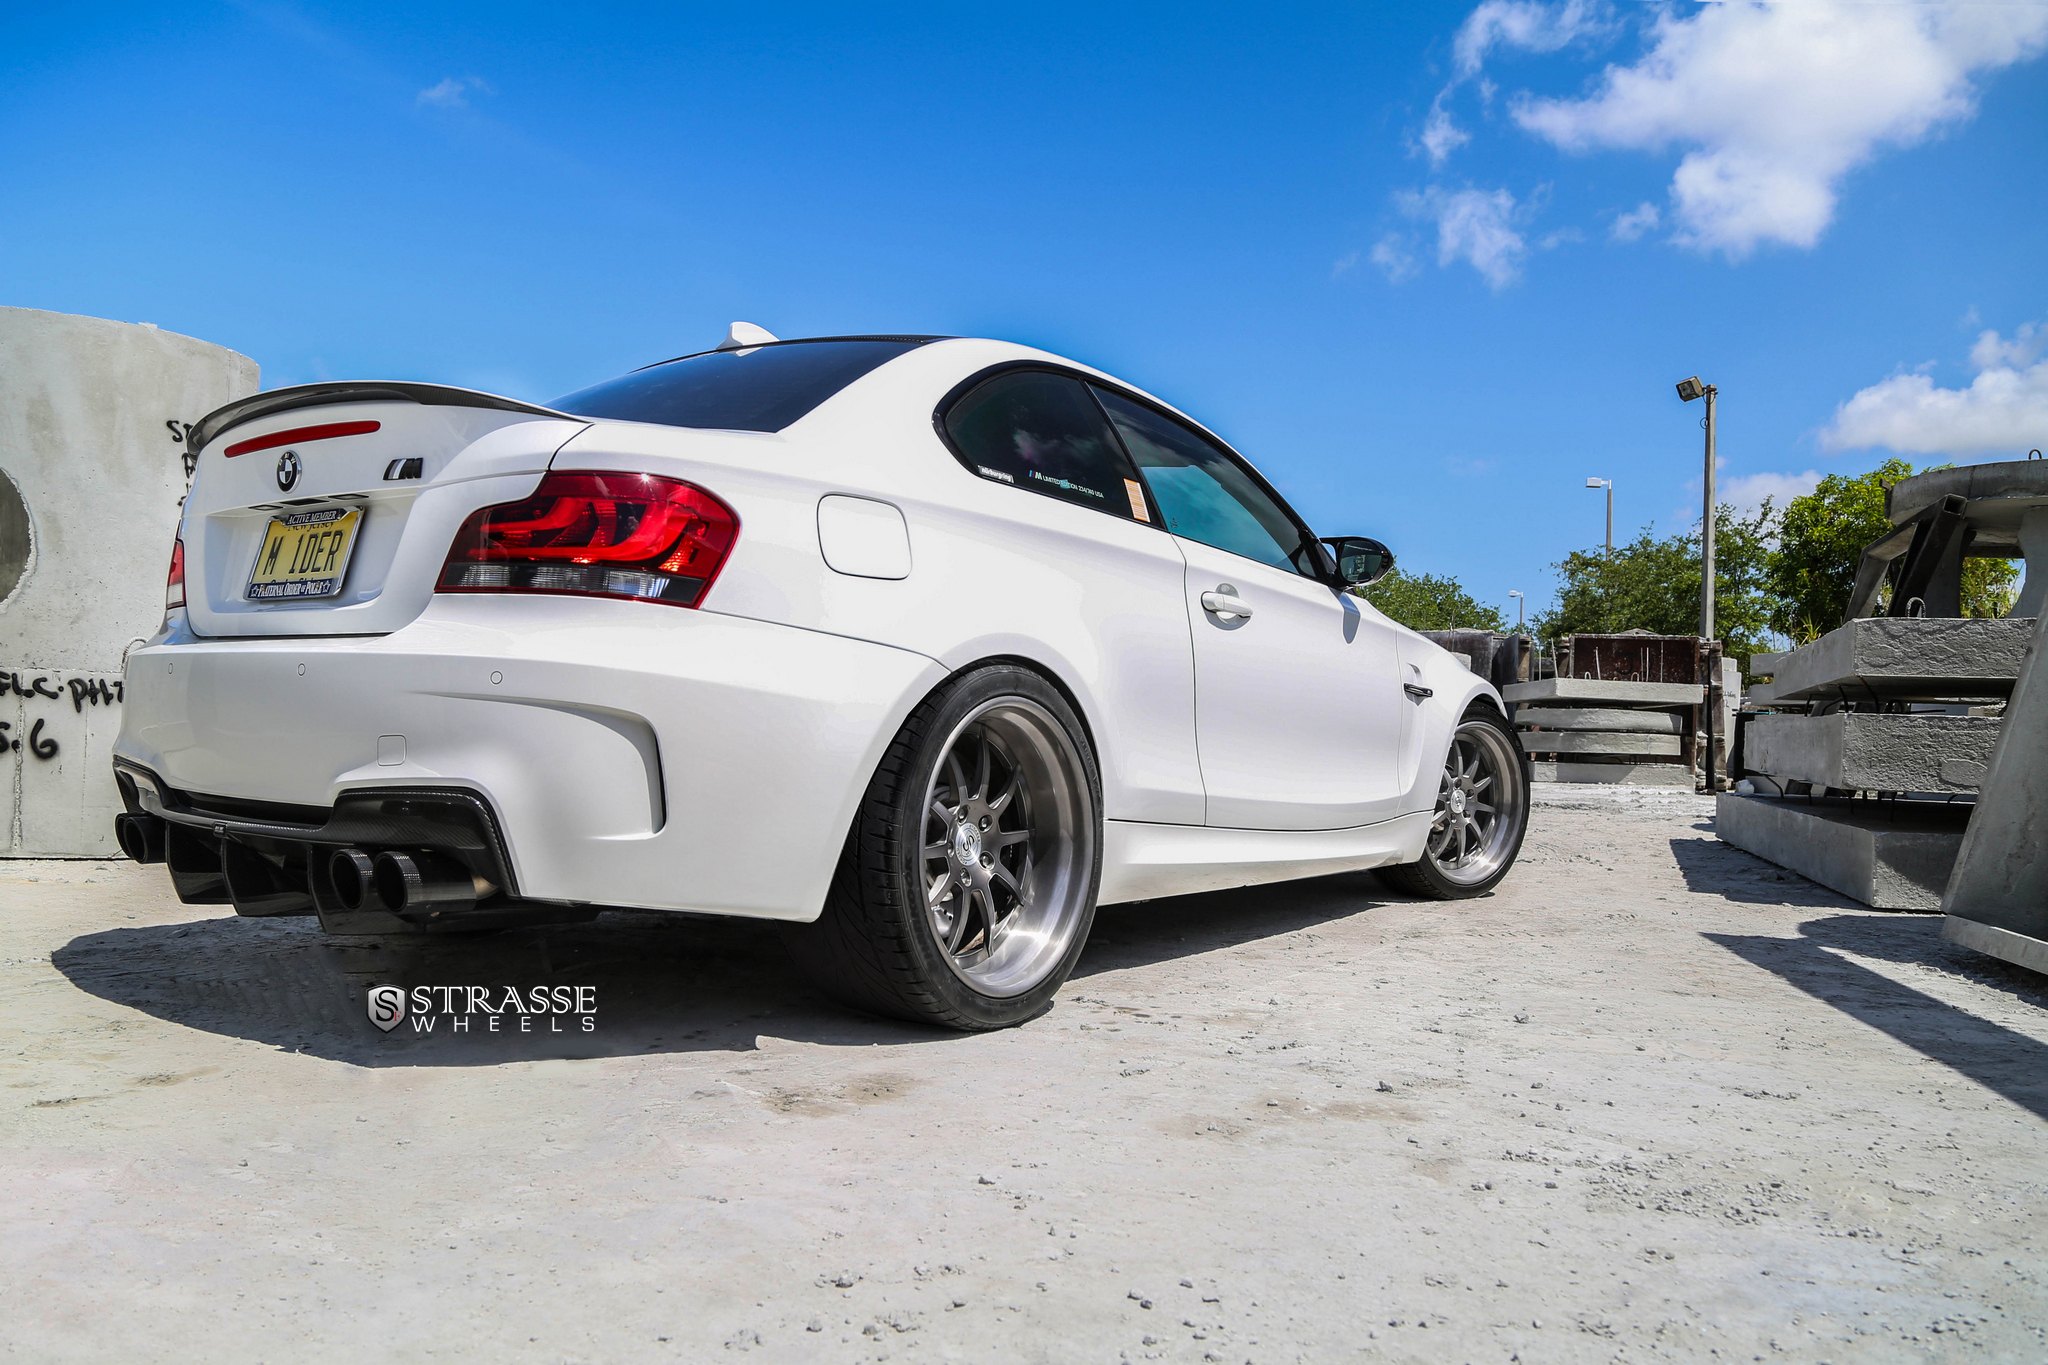 Custom Style Rear Spoiler on White BMW 1-Series - Photo by Strasse Forged